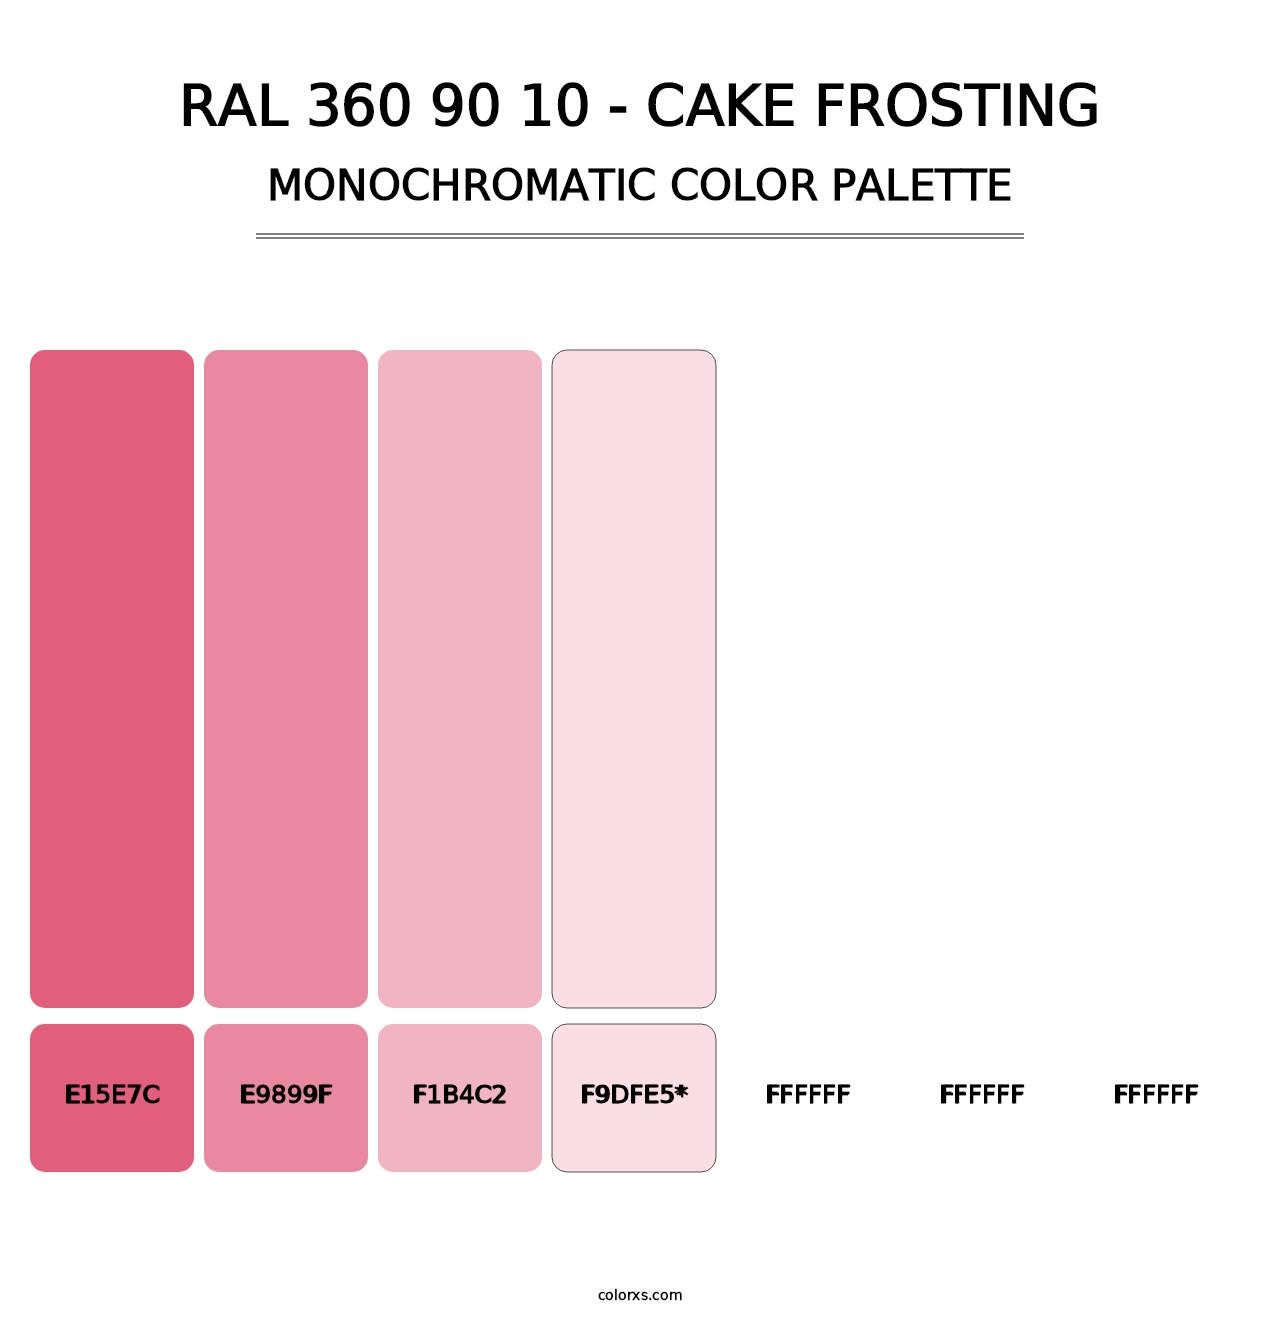 RAL 360 90 10 - Cake Frosting - Monochromatic Color Palette